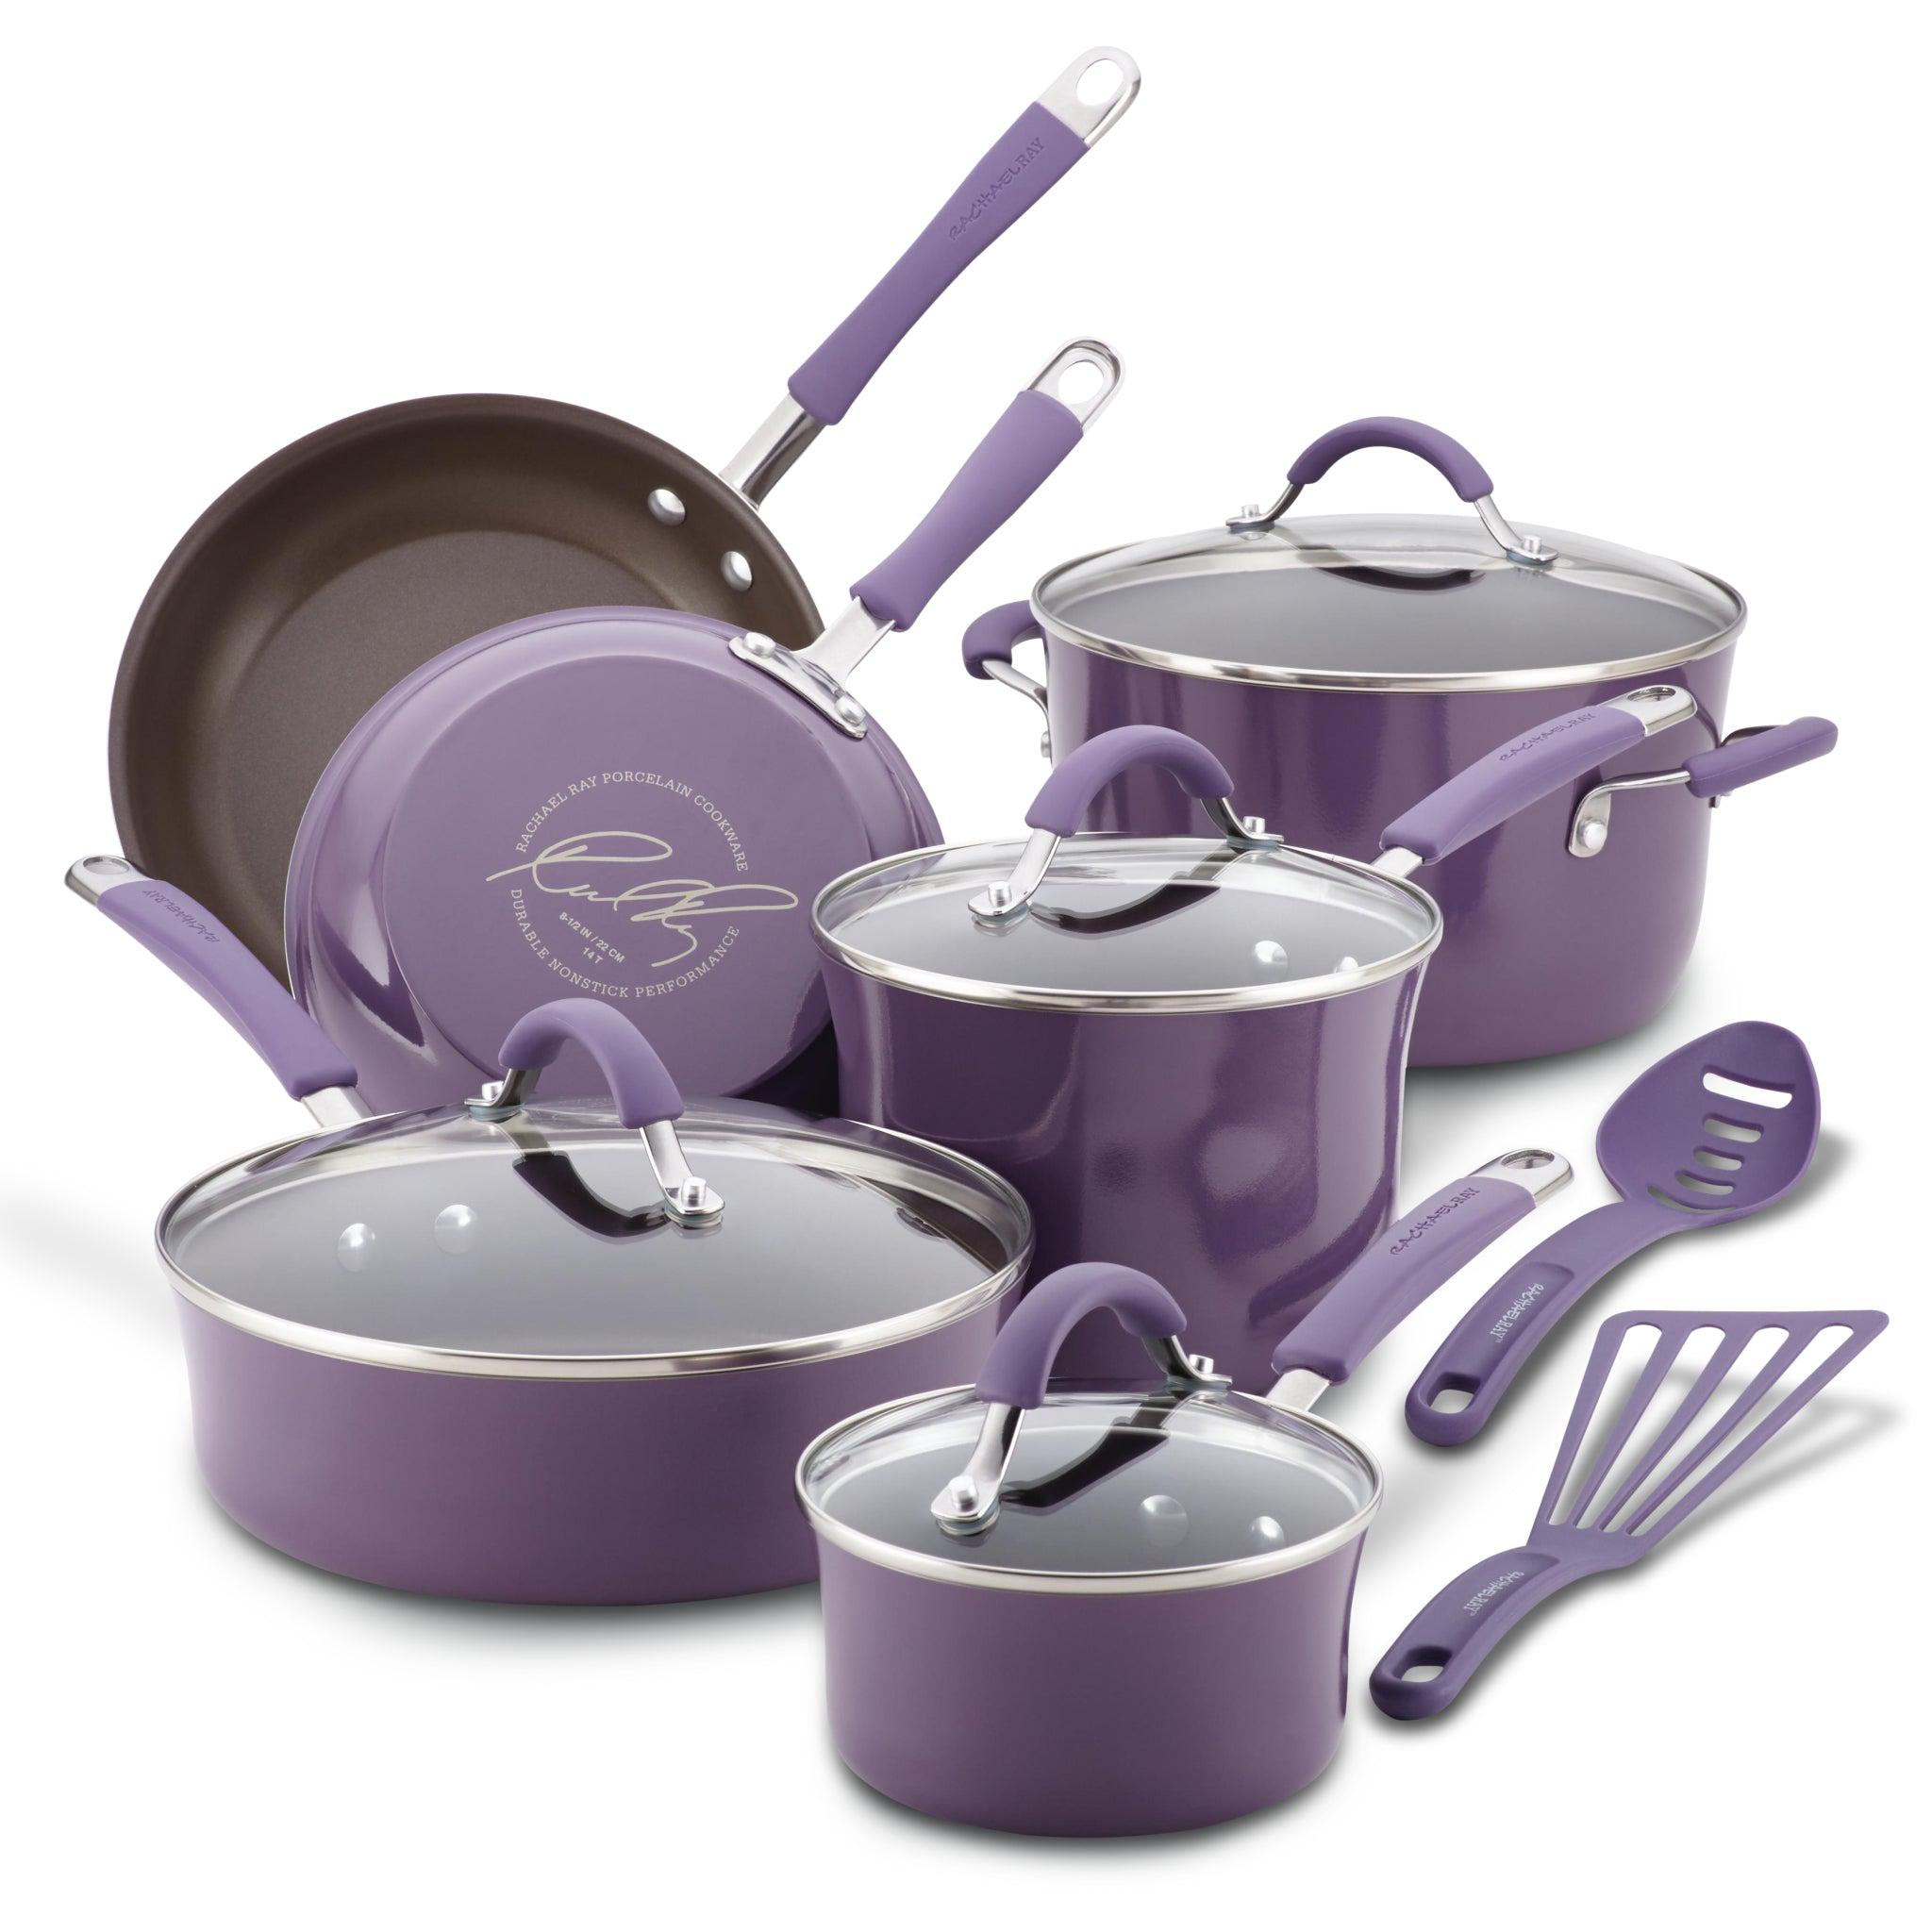  Cuisine Collection 7 Pc Cookware Set: Home & Kitchen